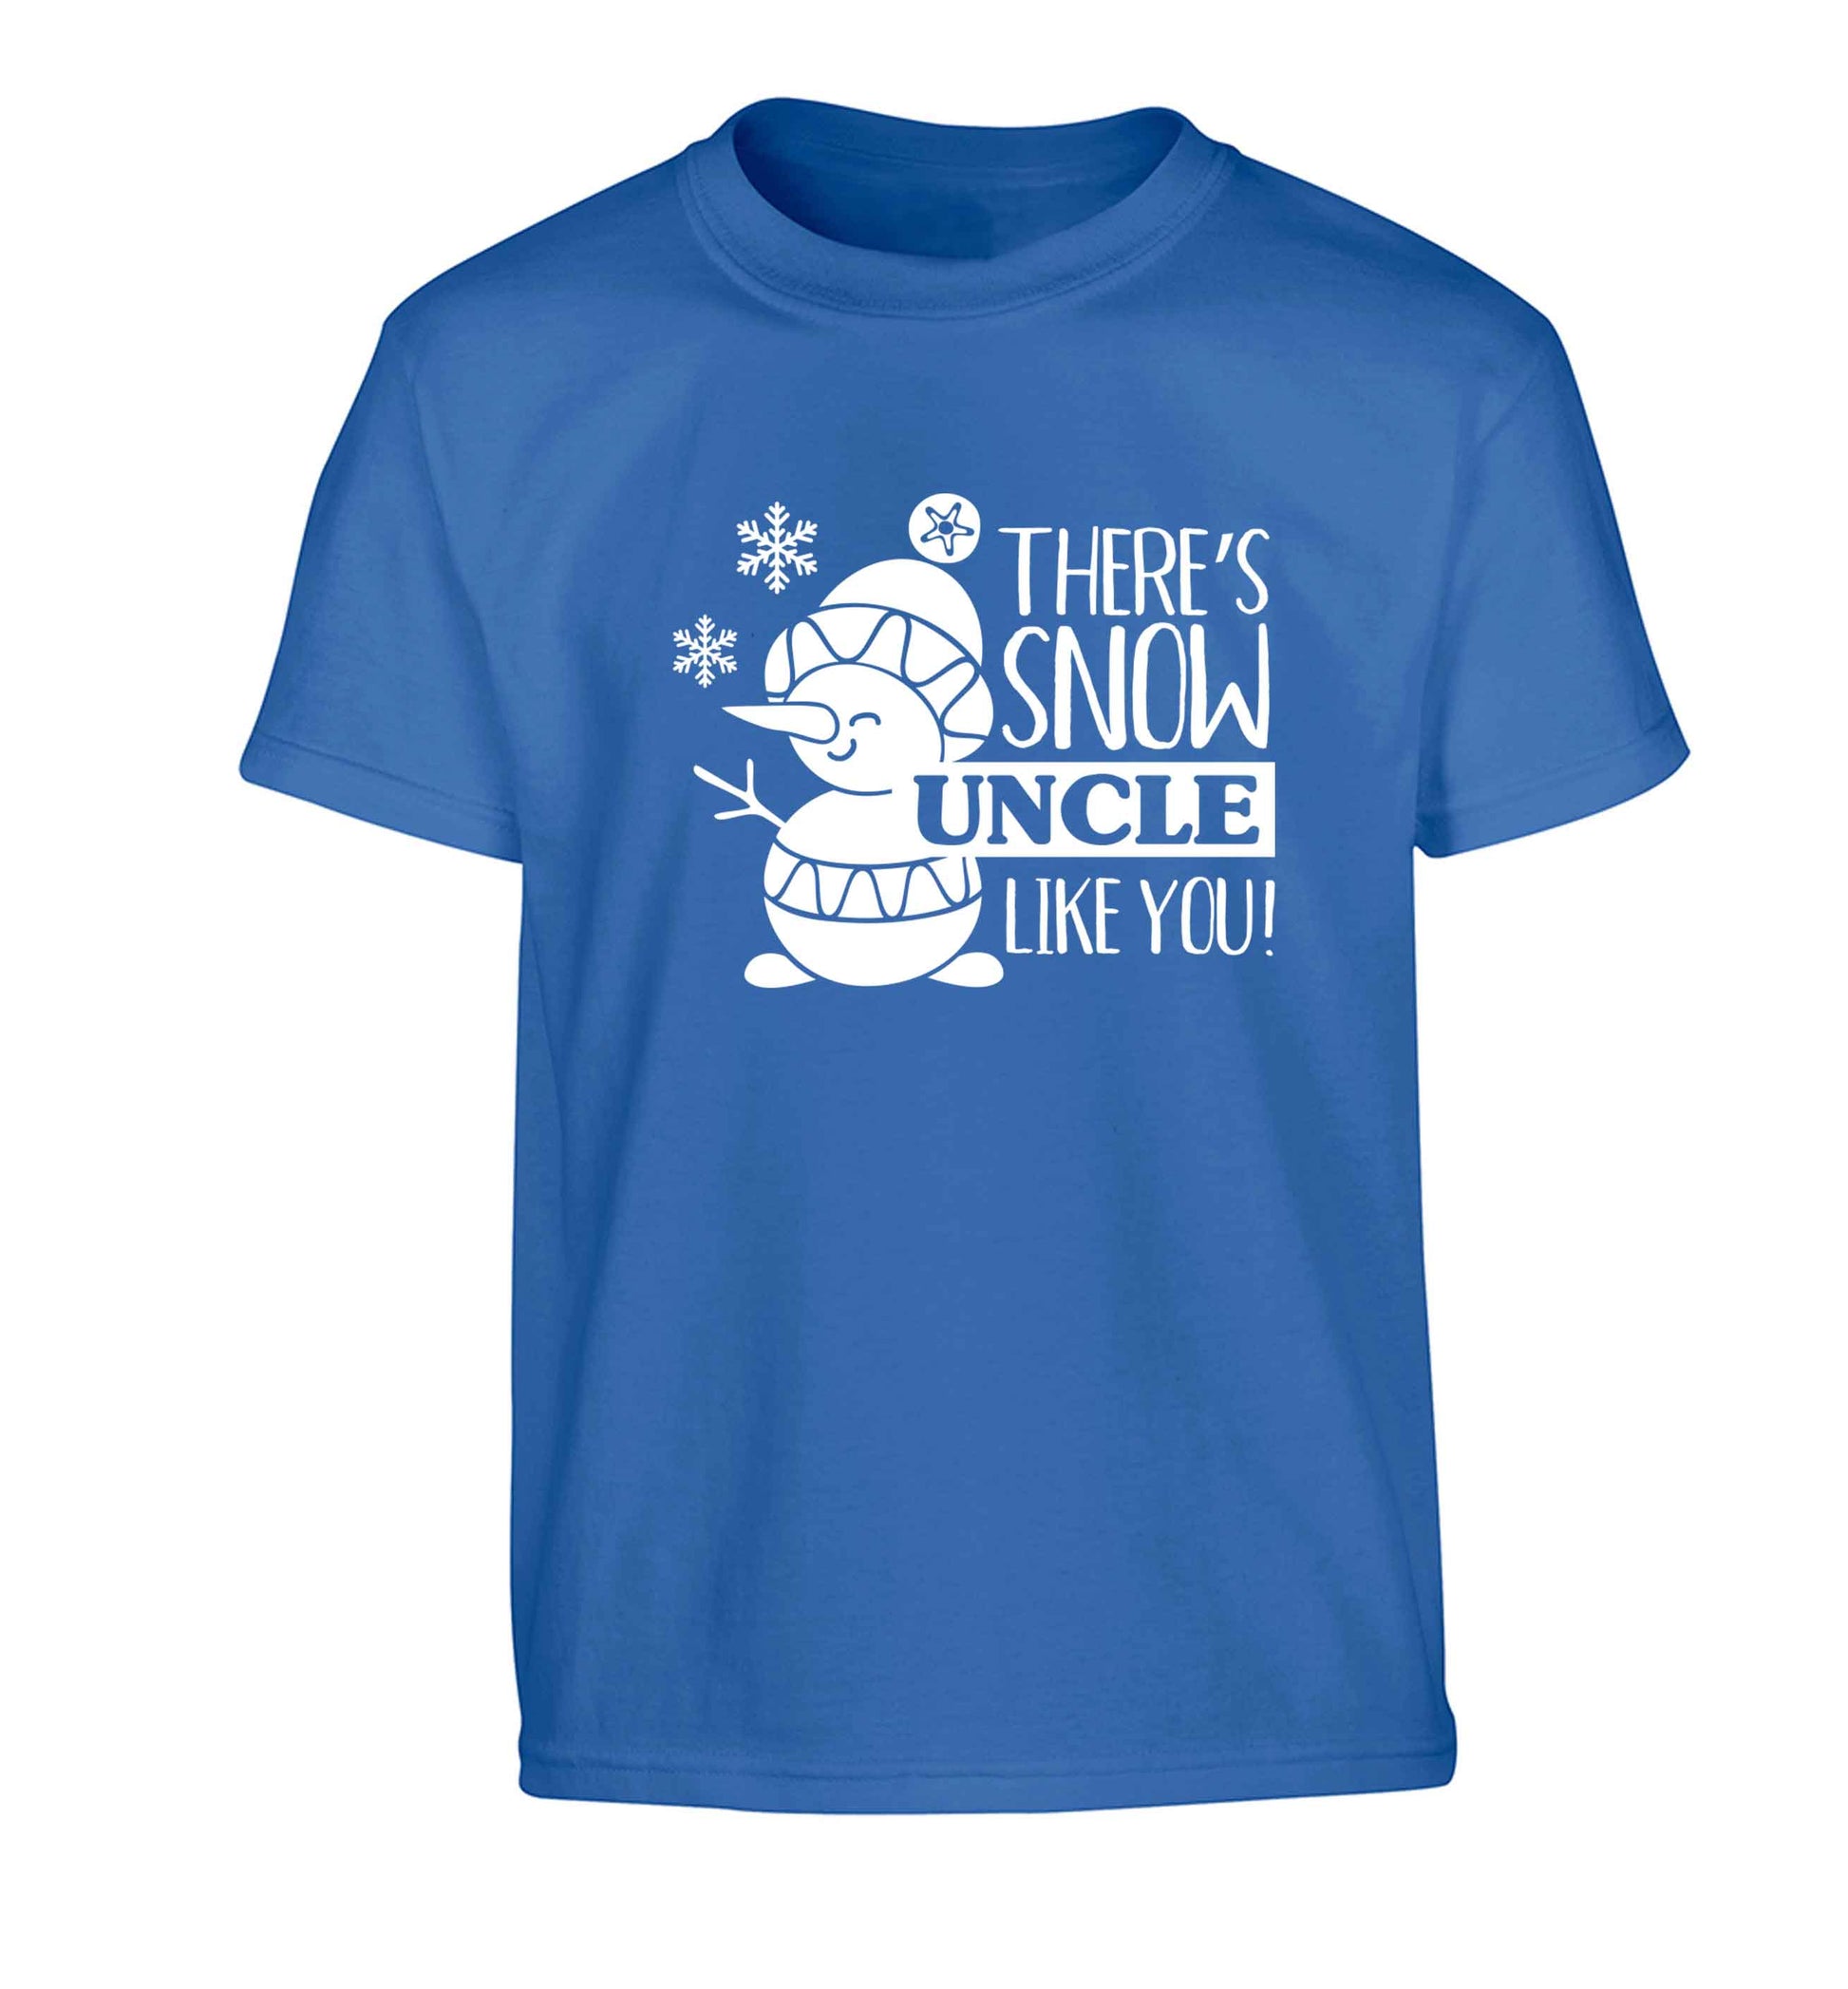 There's snow uncle like you Children's blue Tshirt 12-13 Years